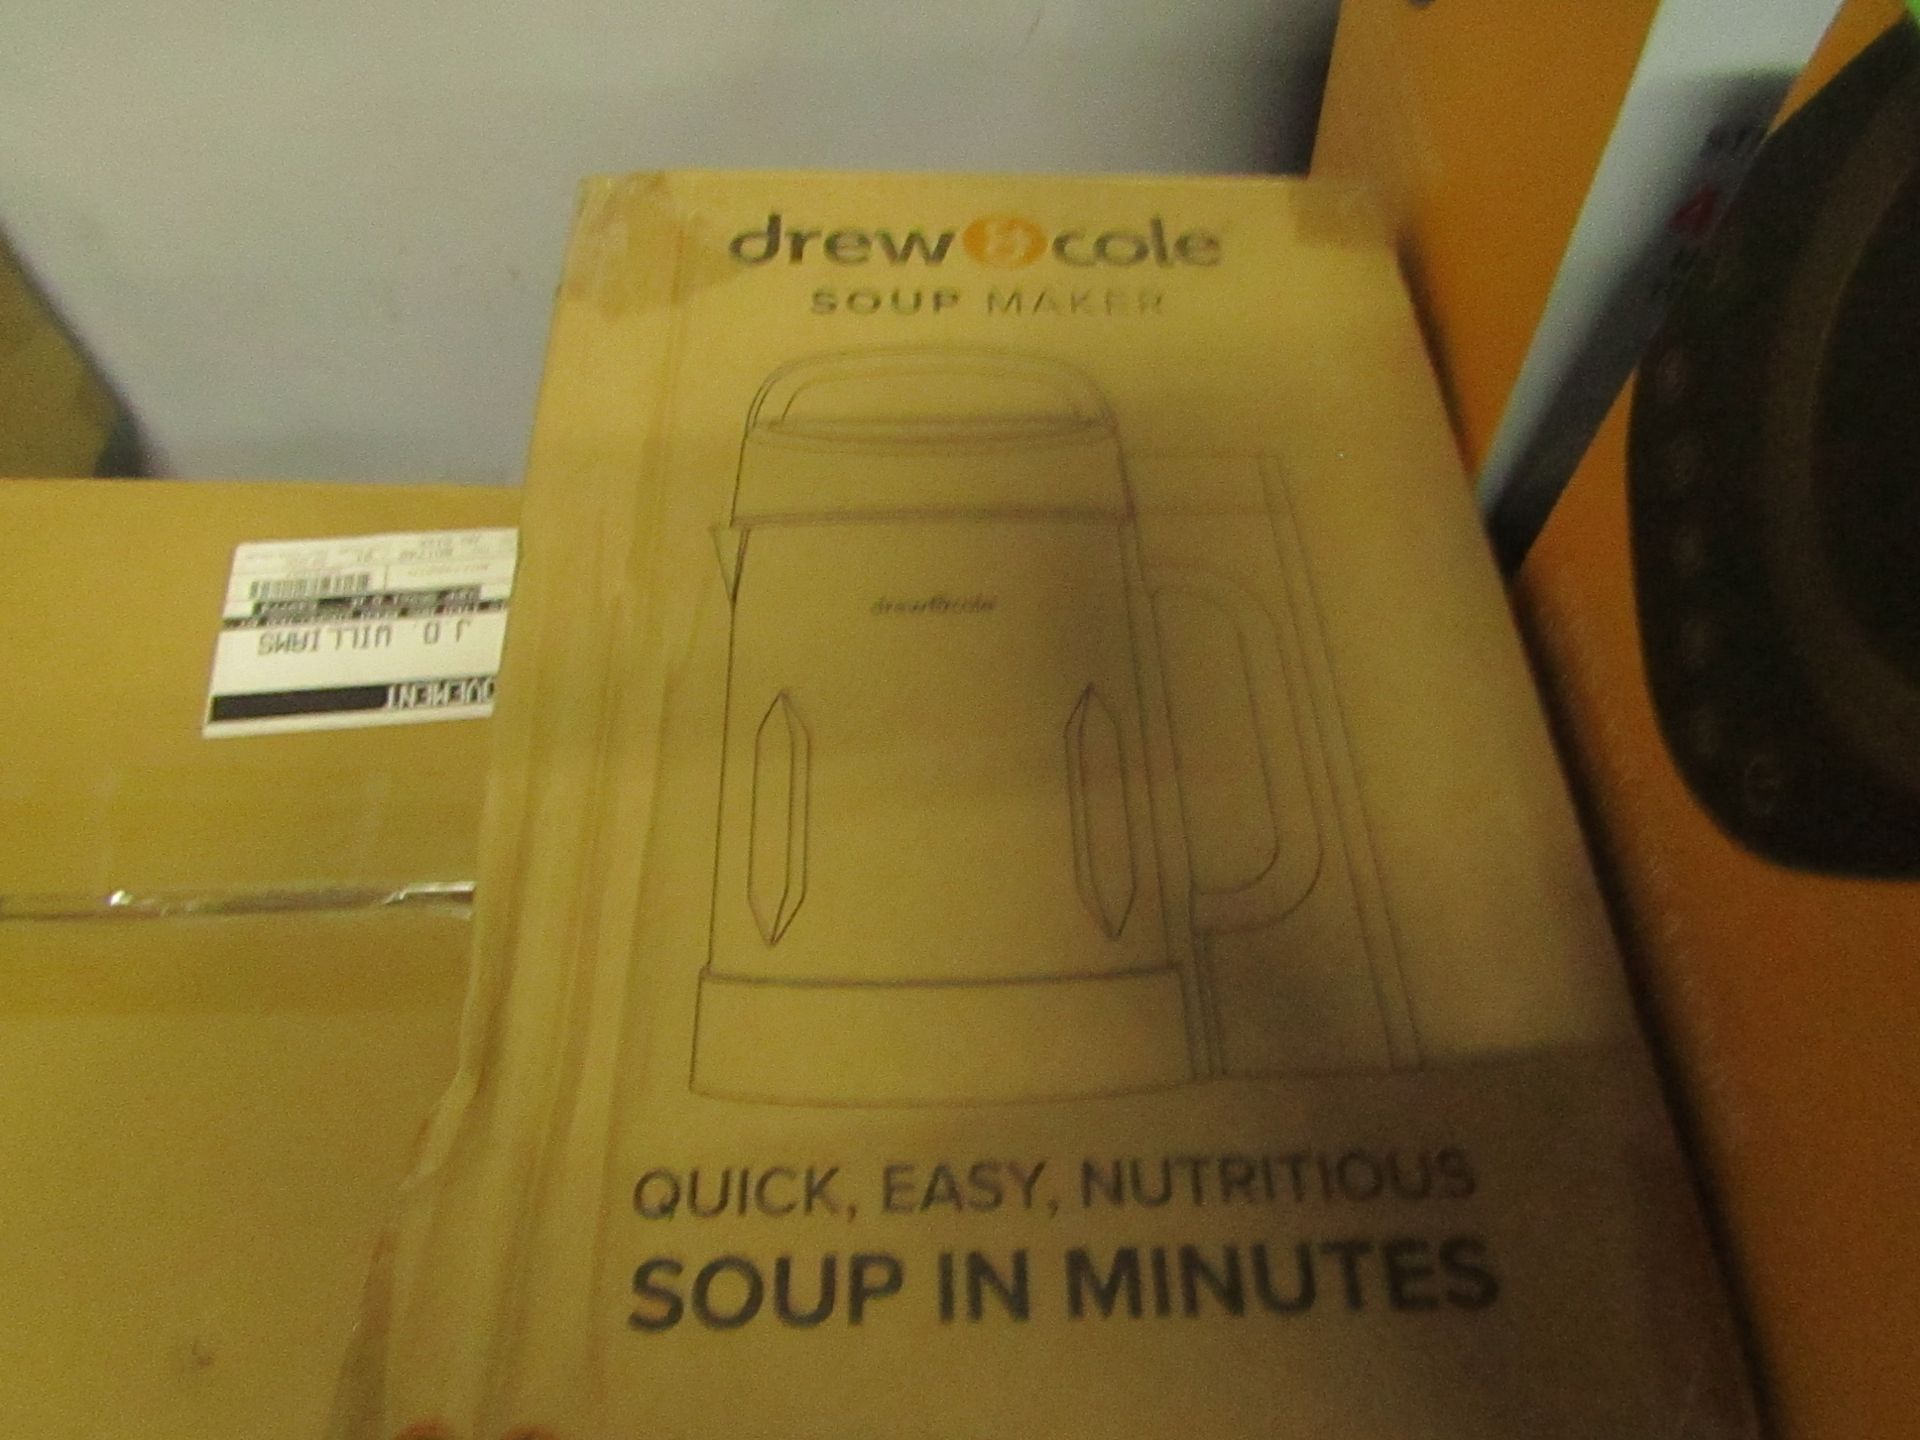 | 8X | DREW AND COLE SOUP CHEF | BOXED AND UNCHECKED | NO ONLINE RESALE | SKU C5060541516809 |